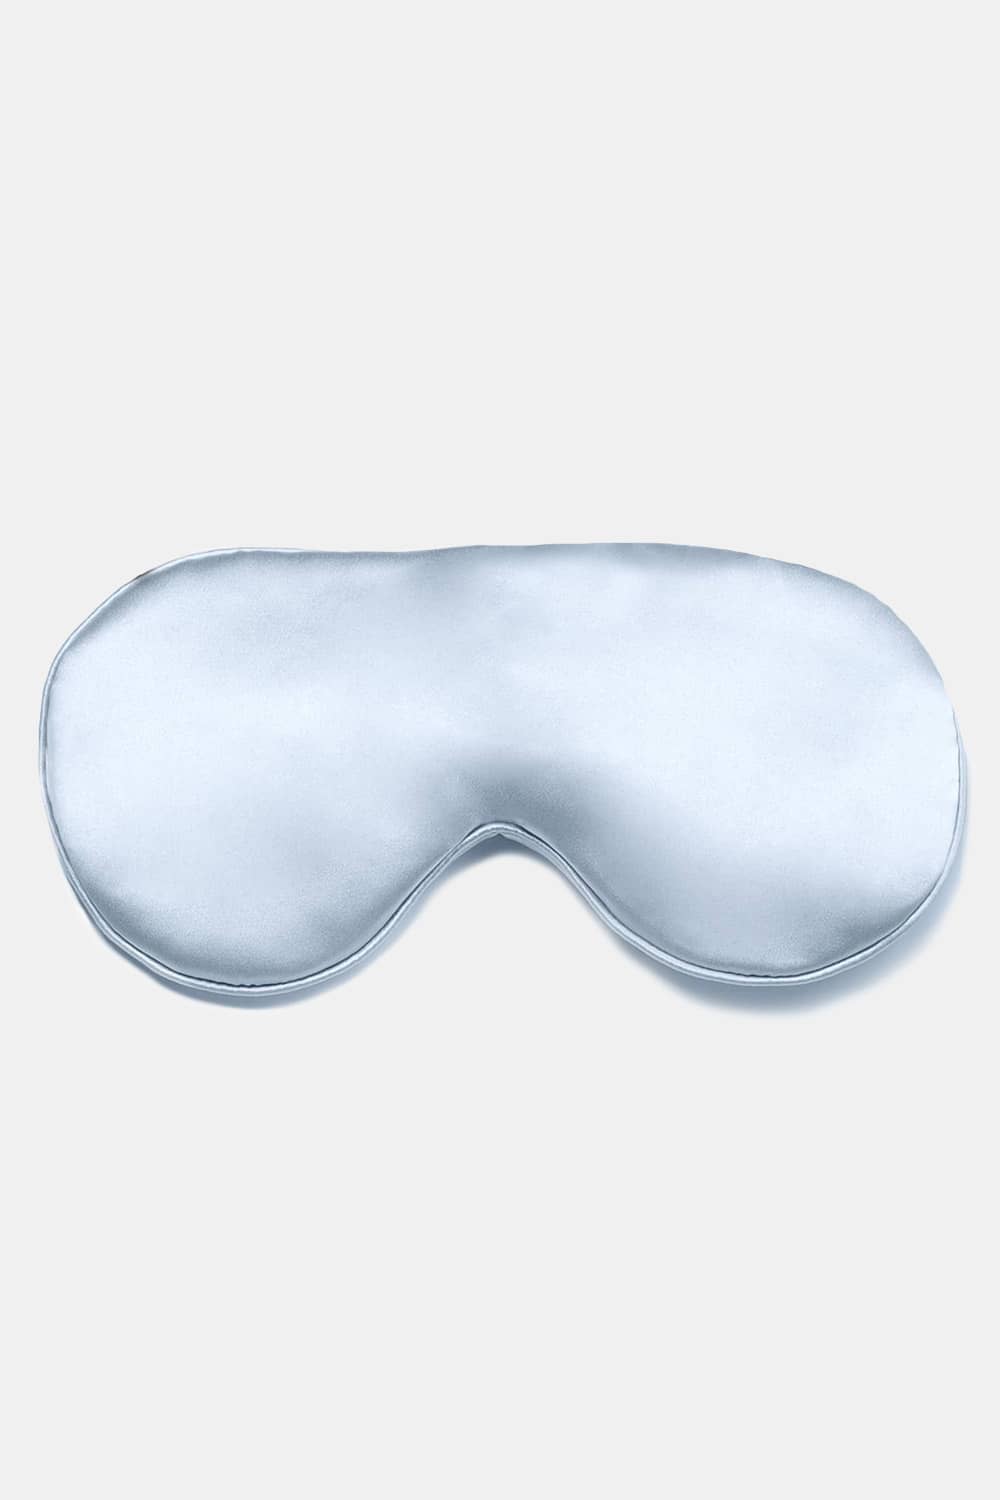 100% Mulberry Silk Therapeutic Sleep Mask - 25 Momme Beauty>Masks Fishers Finery Misty Blue Adjustable 